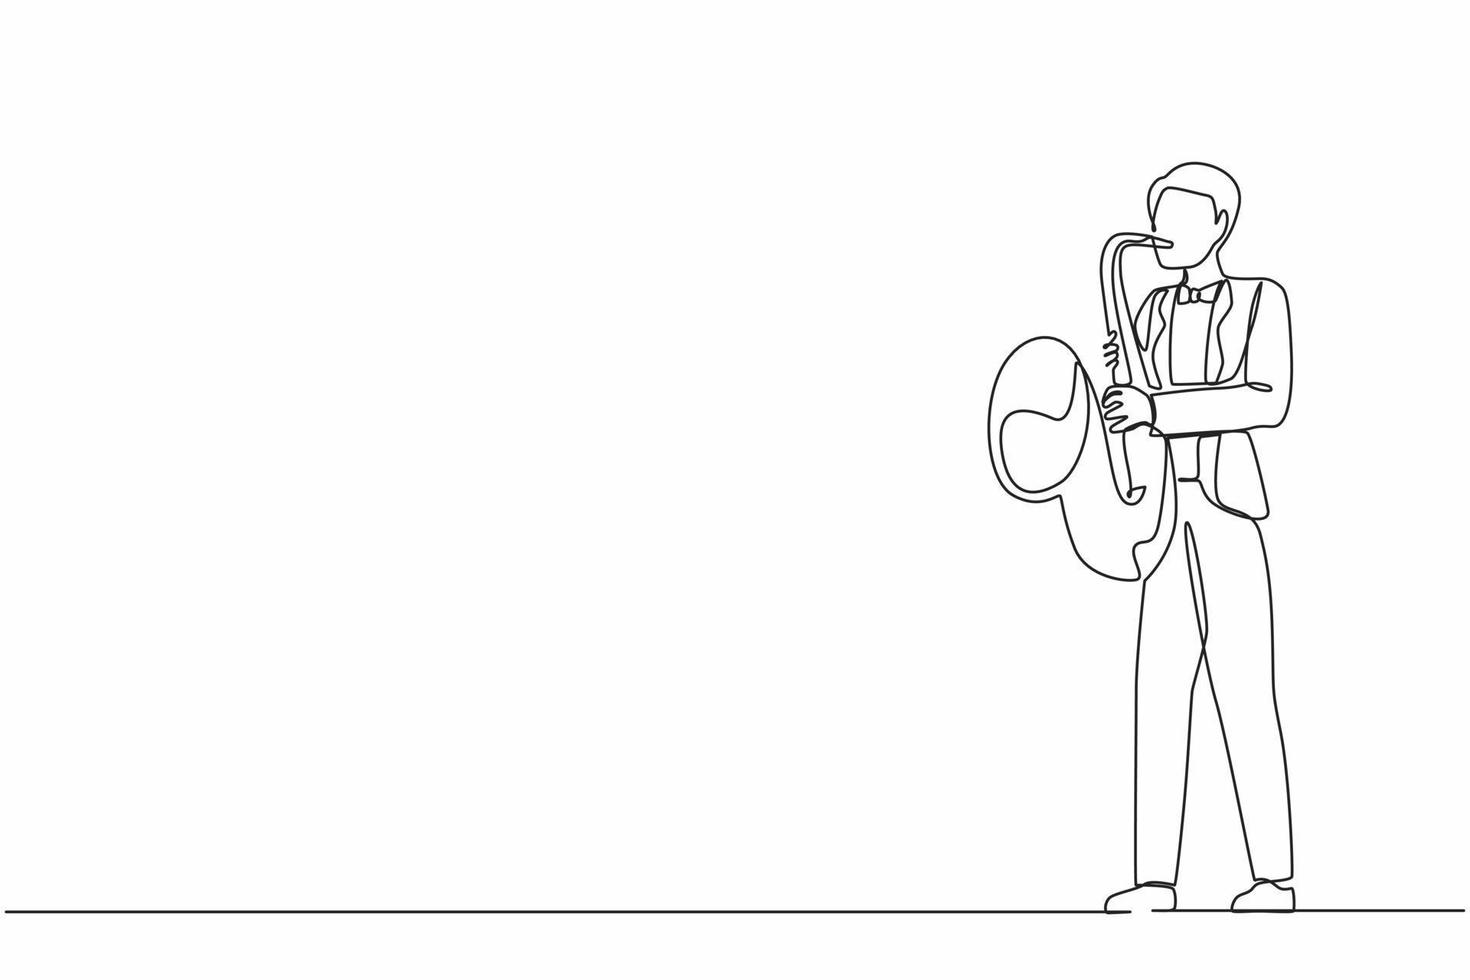 Single continuous line drawing saxophonist. Jazz or blues musician, man plays saxophone. Male performer in festival jazz music, jazz band performances. One line draw graphic design vector illustration